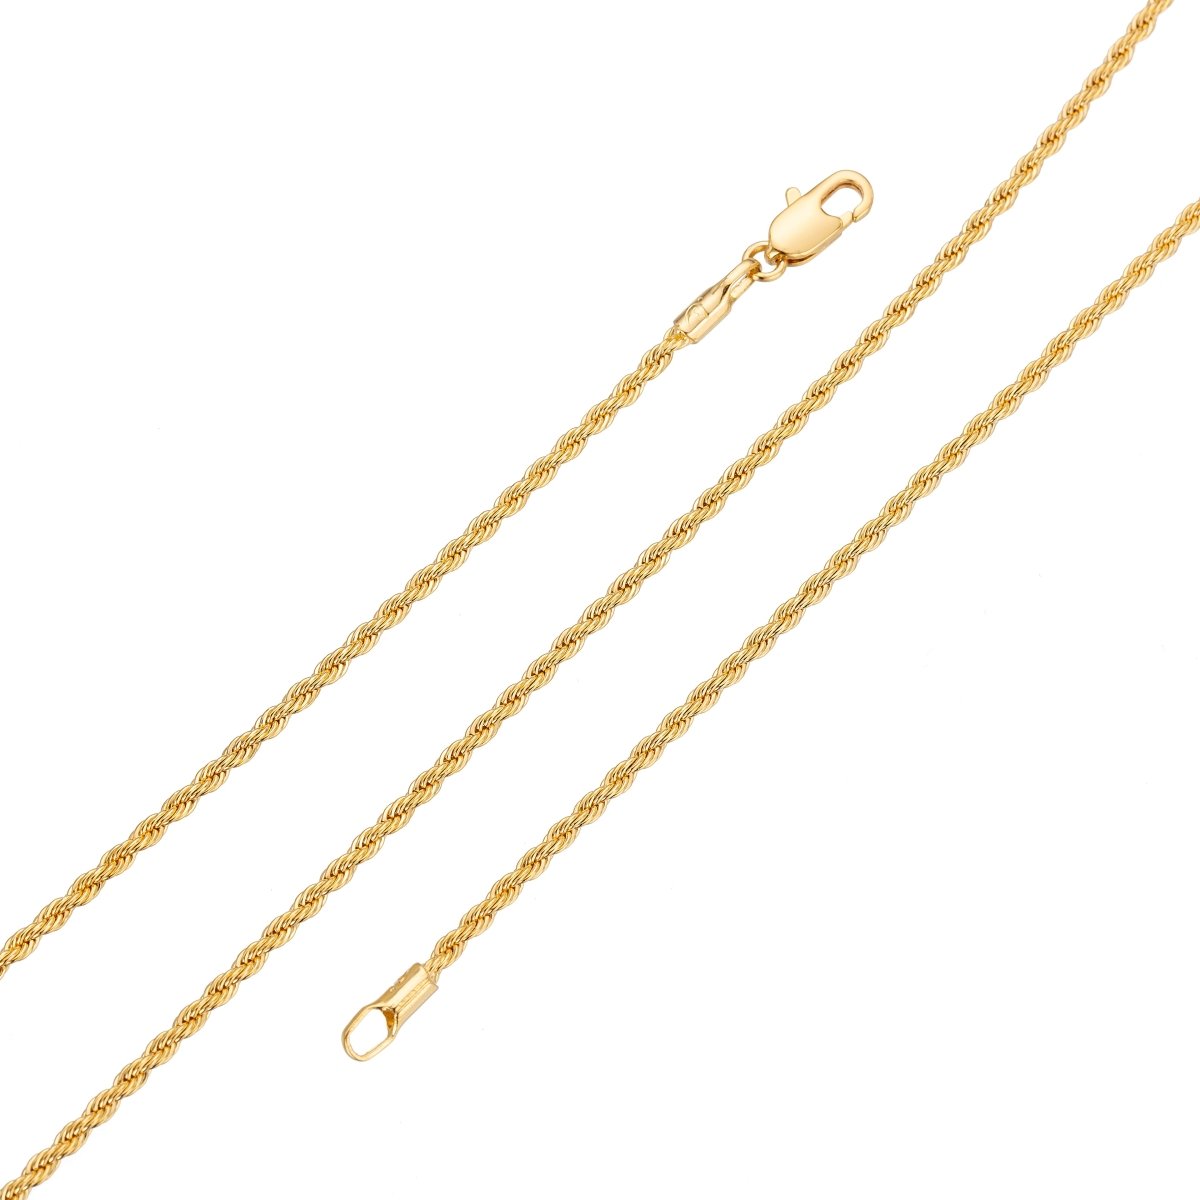 24K Gold Filled Rope Chain with Lobster Clasps, 1.8mm in Width, 18 Inches Layering Twisted Rope Necklace | CN-568 Clearance Pricing - DLUXCA